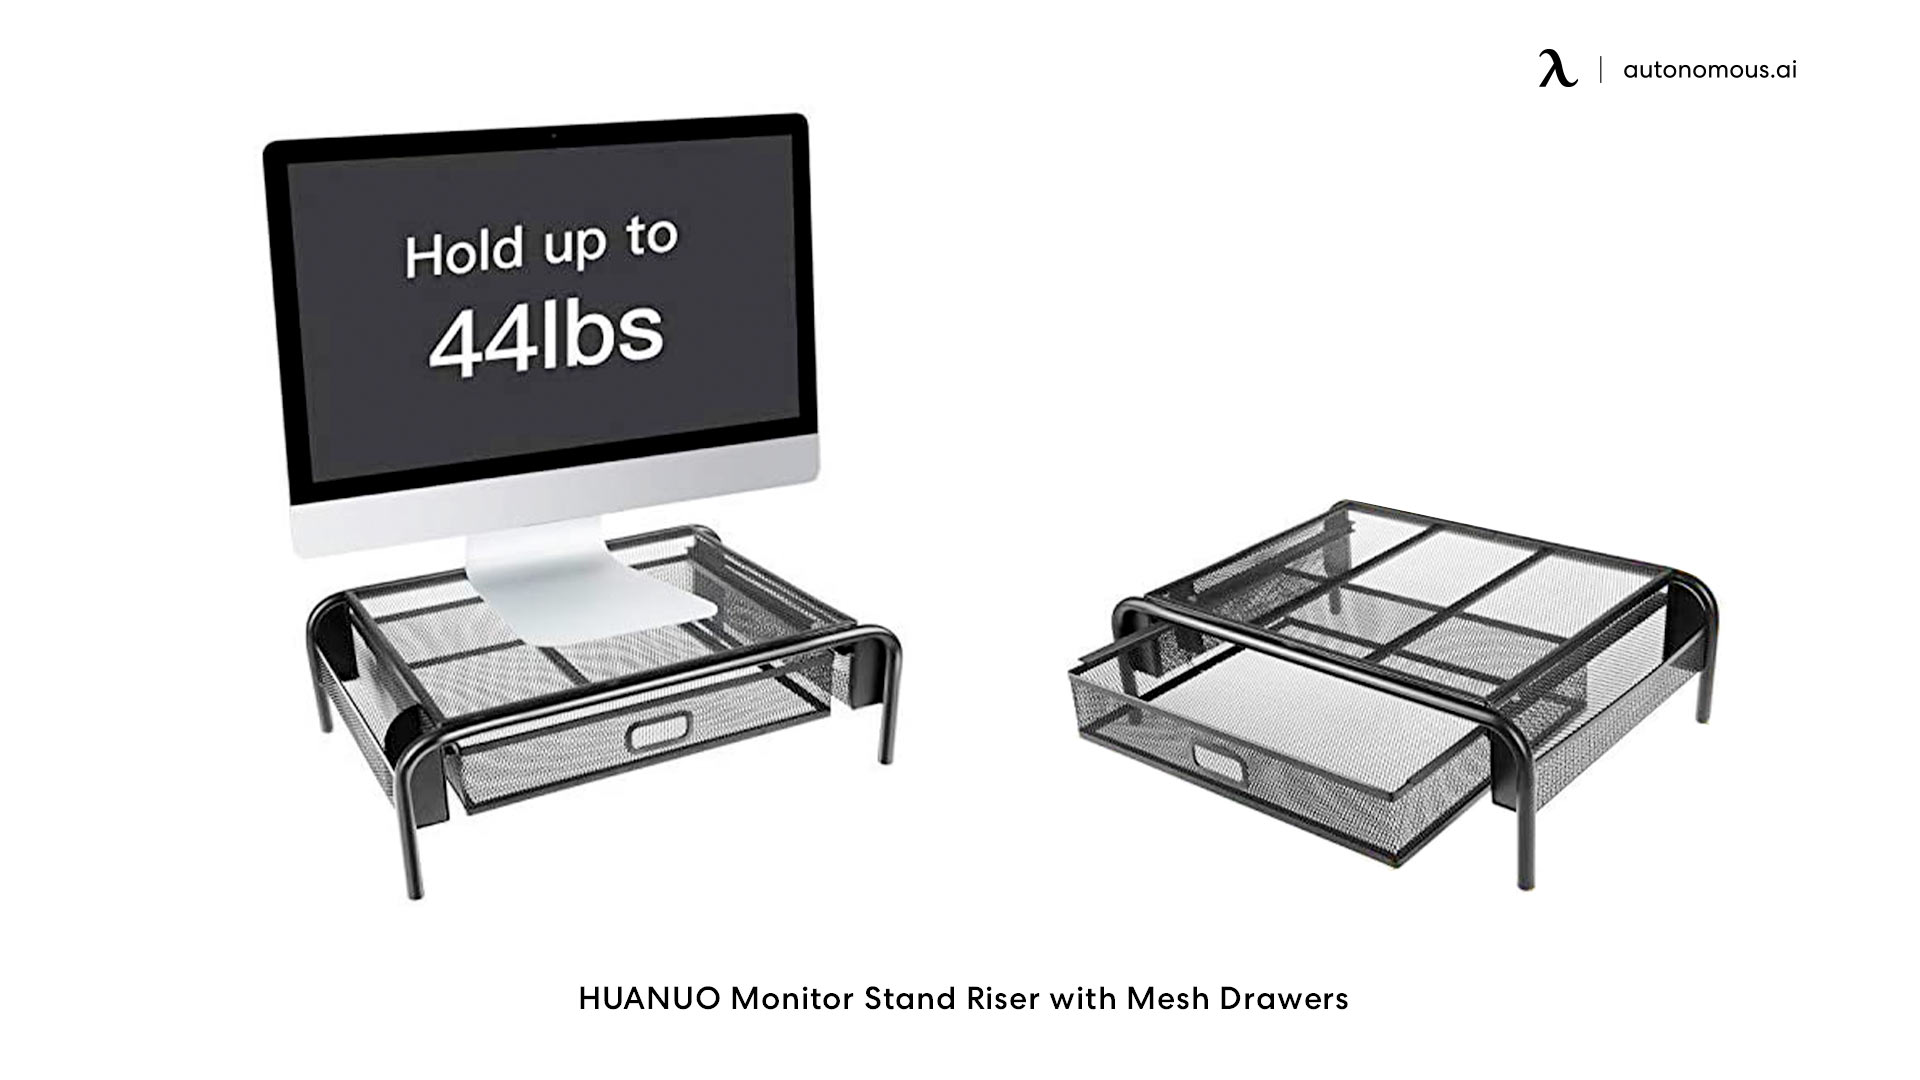 HUANUO Monitor Stand Riser with Mesh Drawers